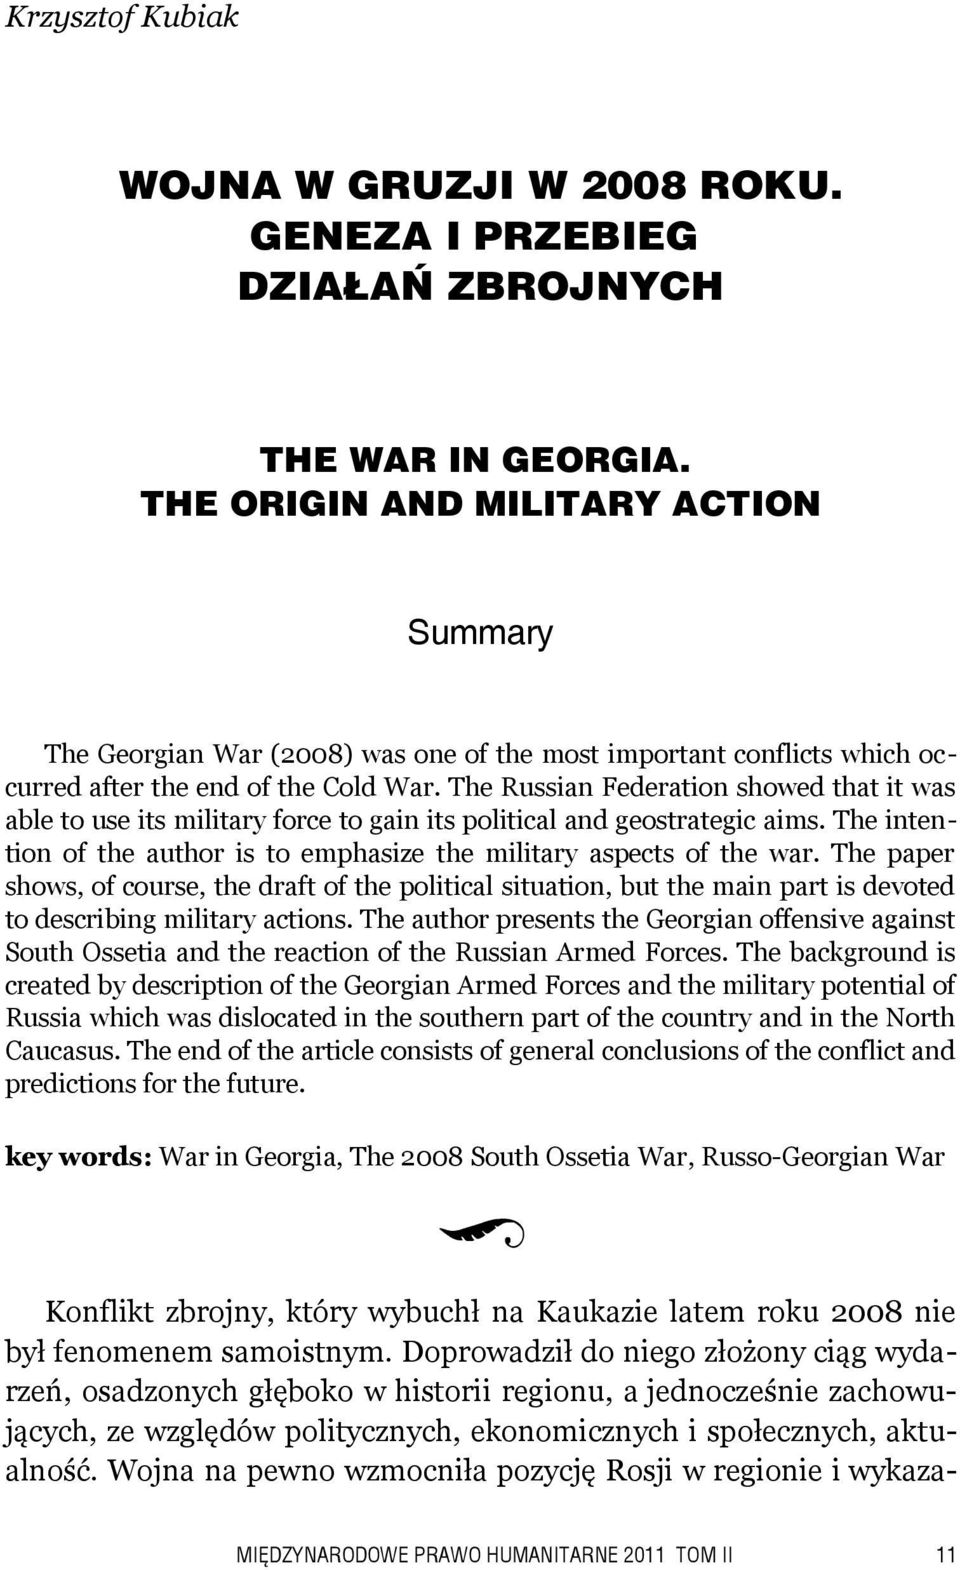 The Russian Federation showed that it was able to use its military force to gain its political and geostrategic aims. The intention of the author is to emphasize the military aspects of the war.